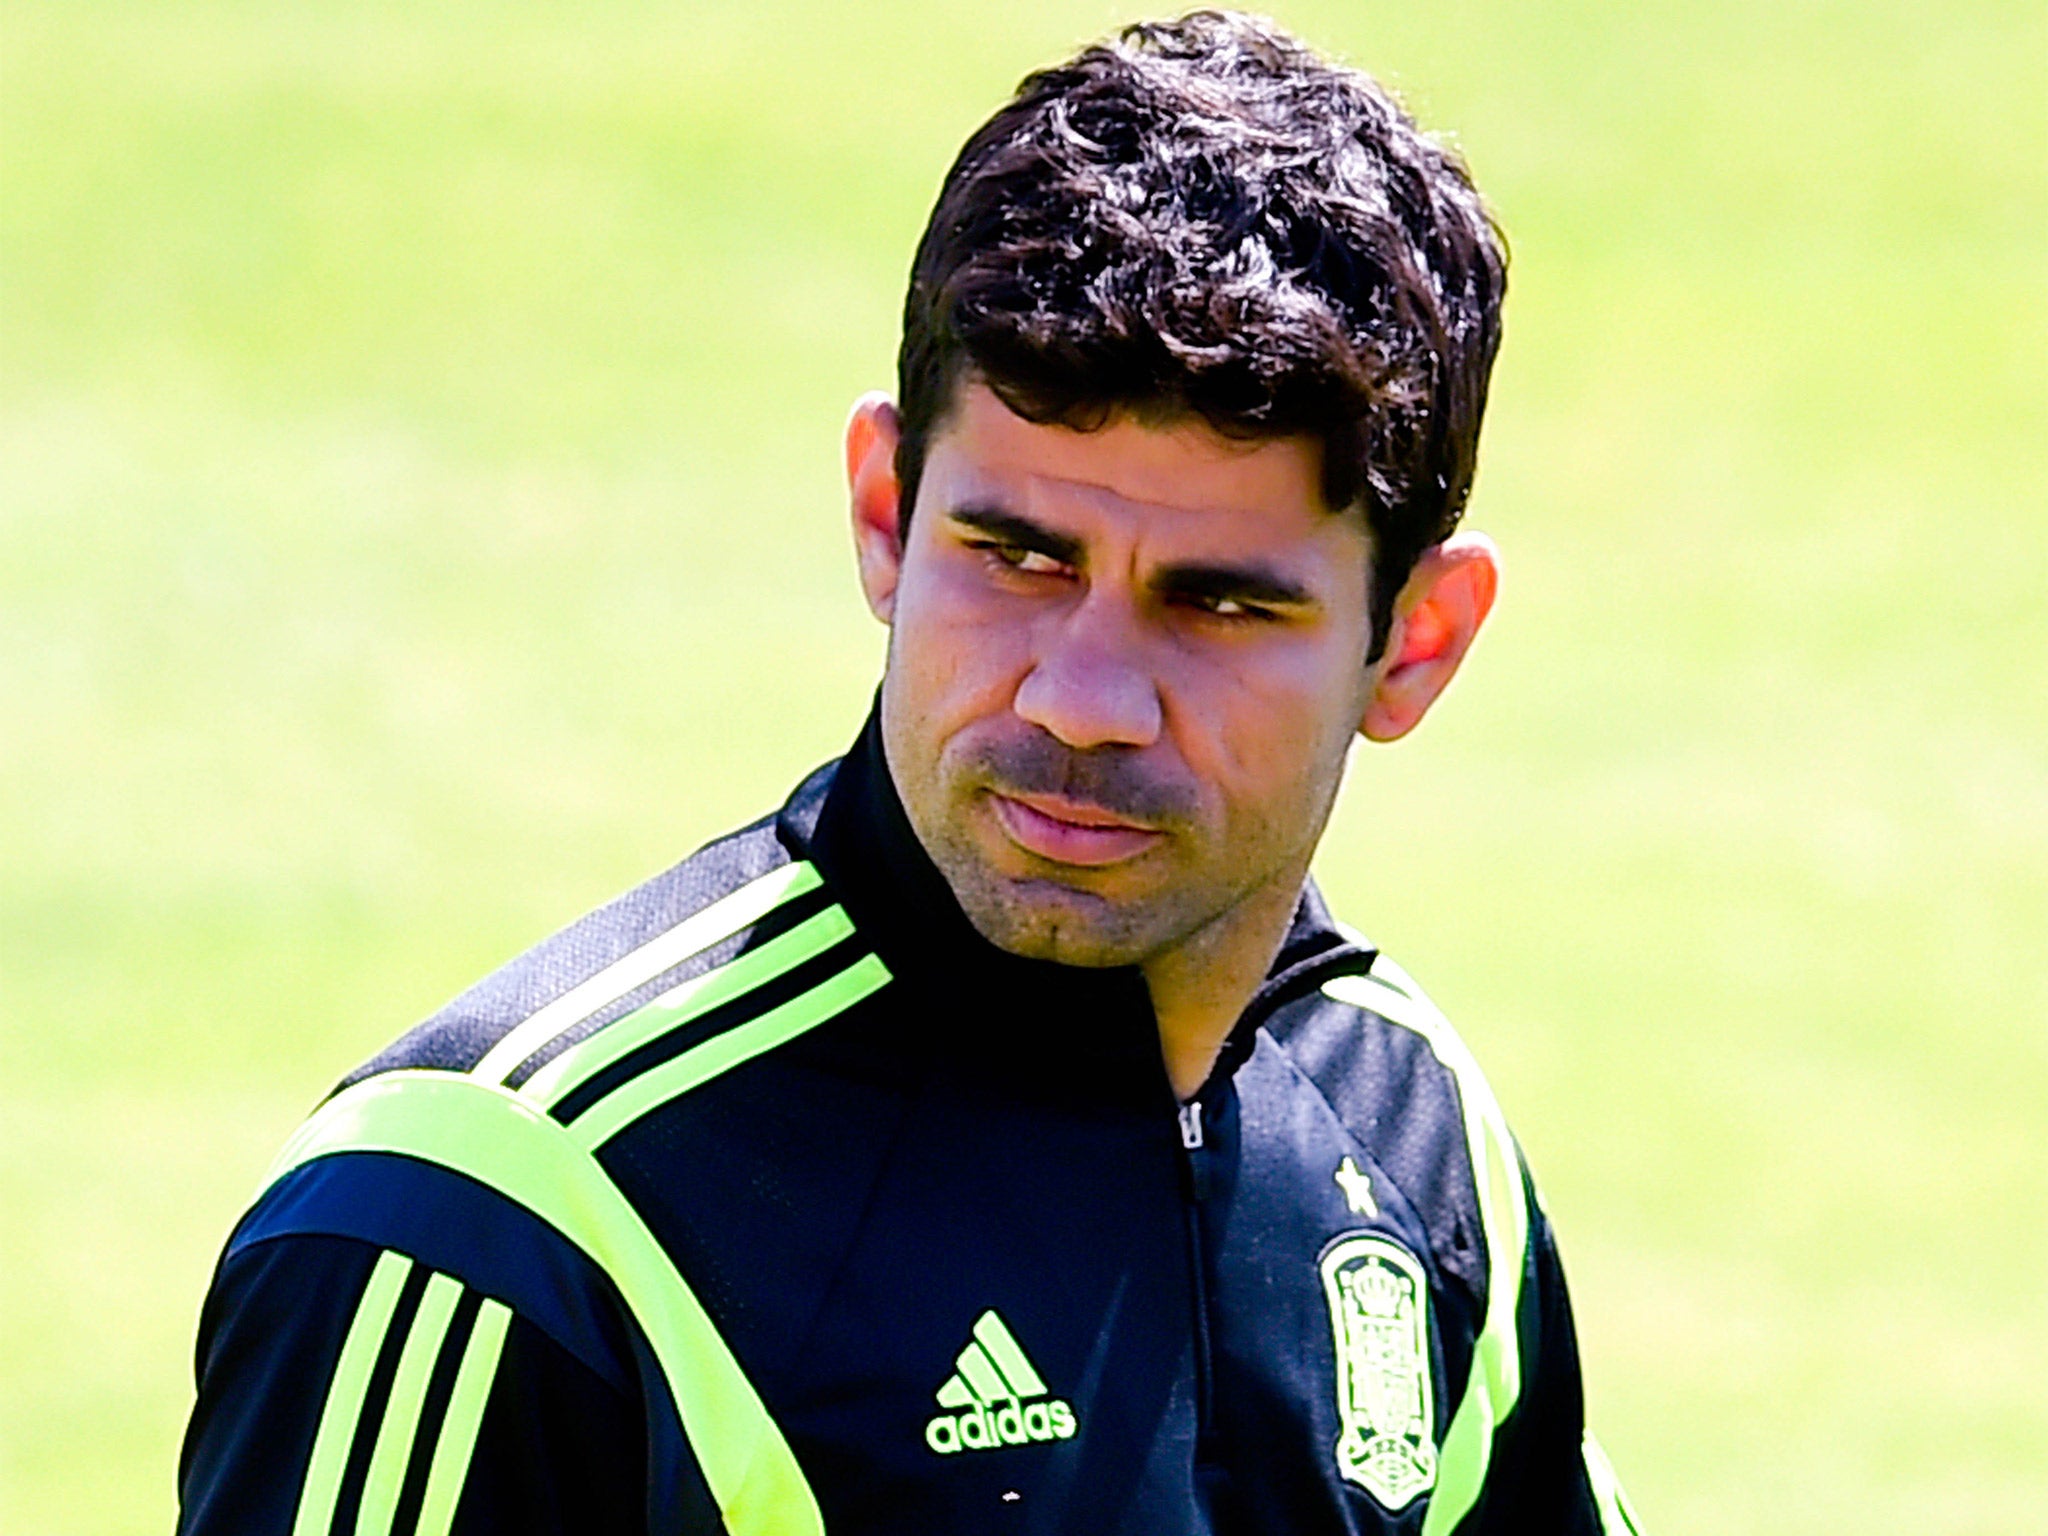 Diego Costa is currently preparing for the World Cup with Spain